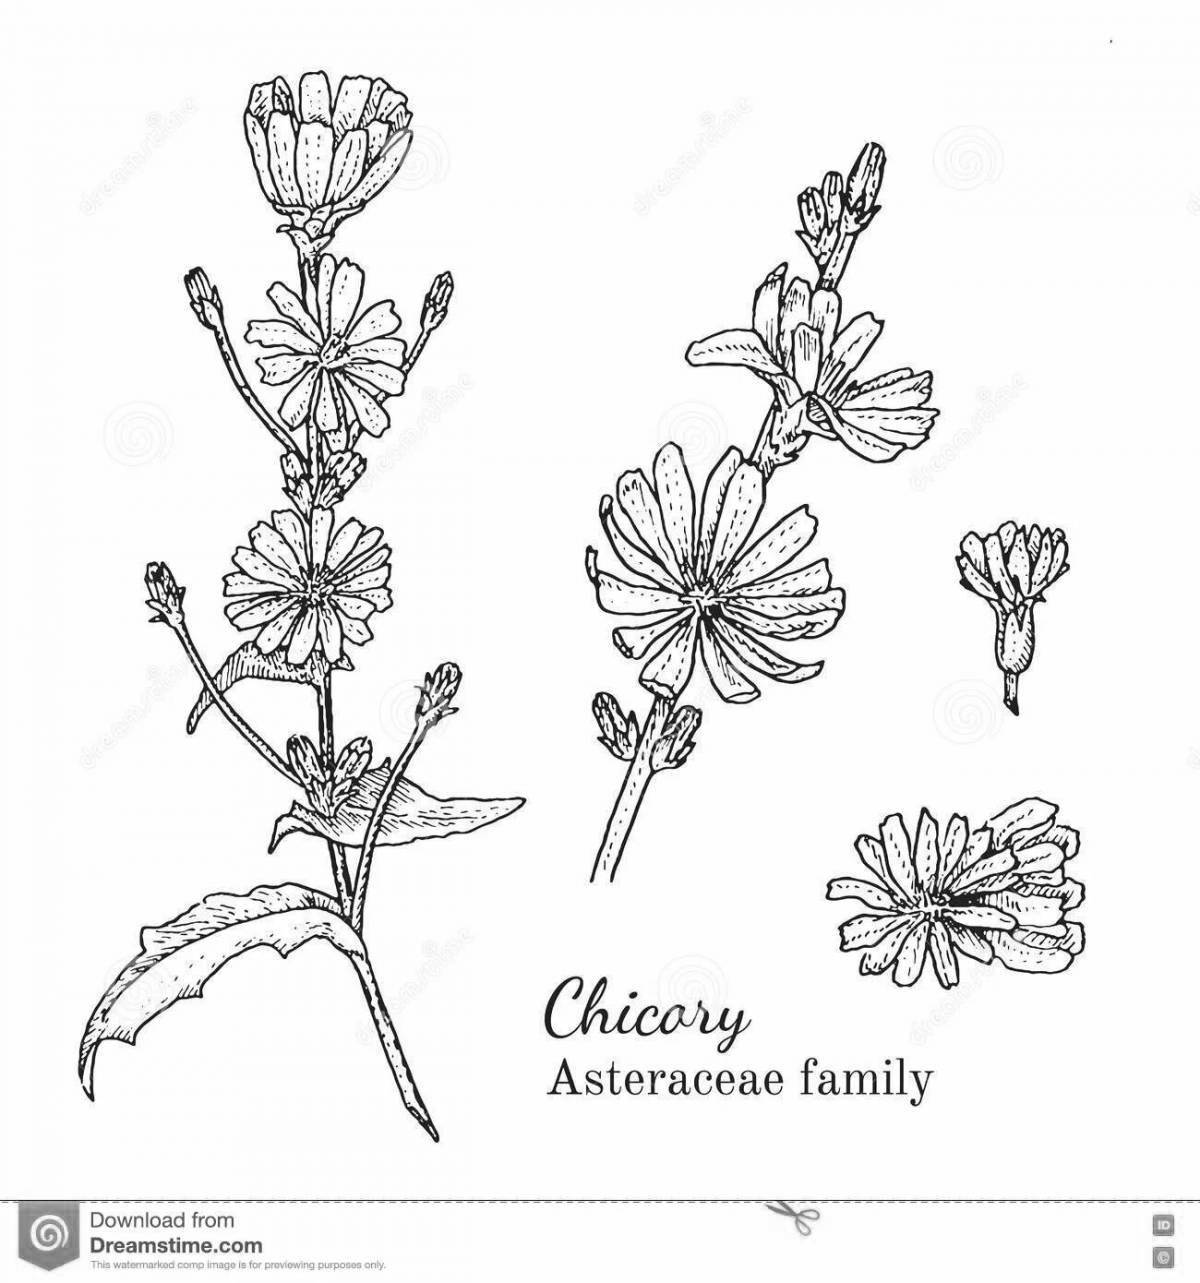 Colouring peaceful chicory